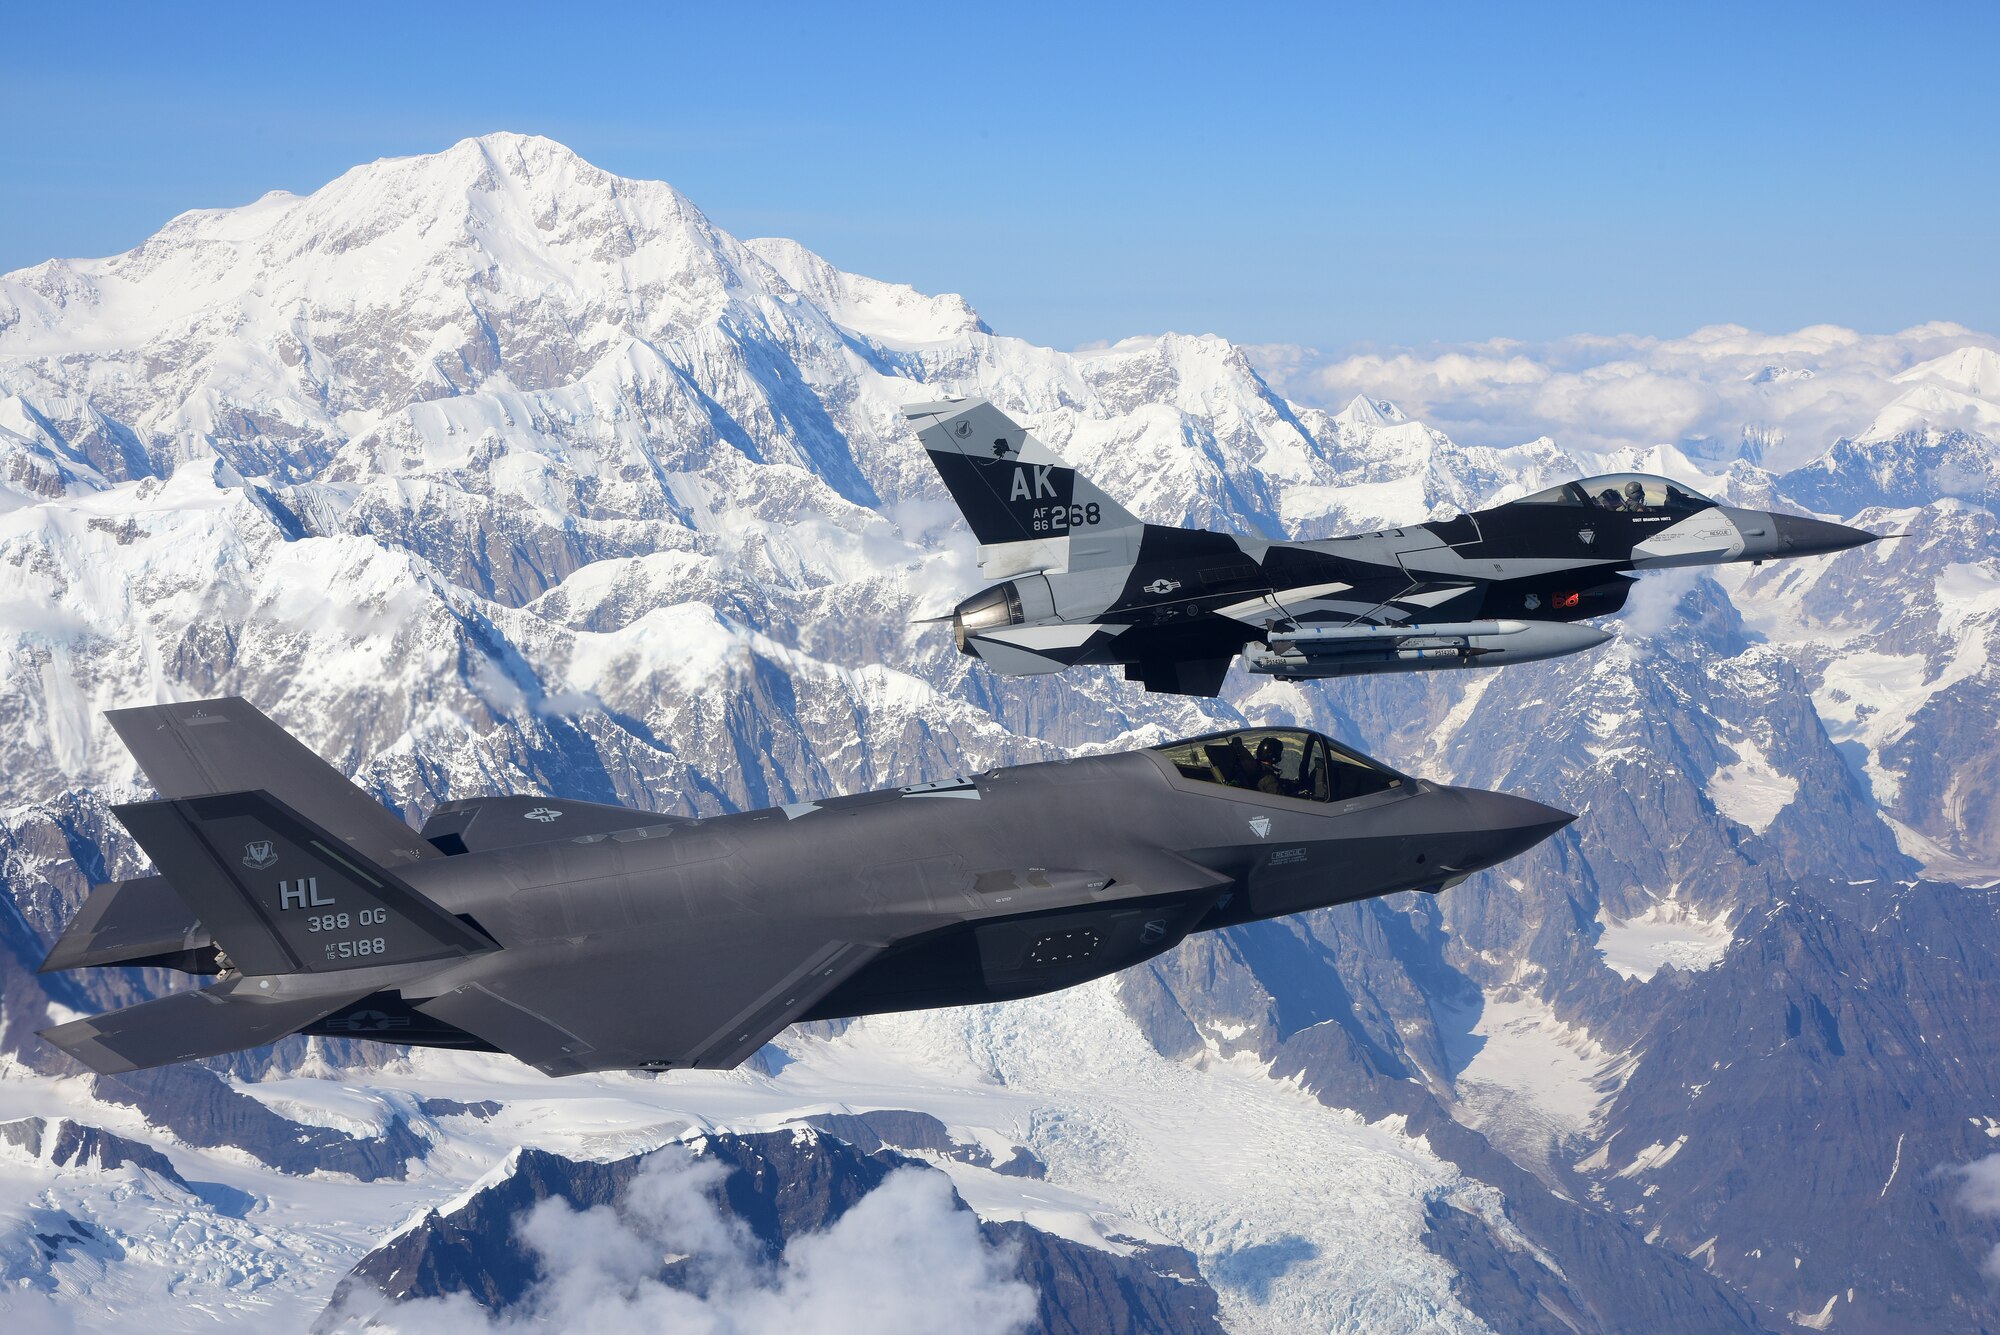 An F-35A Lightning II, assigned to the 388th Fighter Wing at Hill Air Force Base in Utah, and an F-16 Fighting Falcon, assigned to the 18th Aggressor Squadron at Eielson Air Force Base in Alaska, fly over Denali National Park, Alaska, Aug. 17, 2020. The 388th FW's F-35As made their debut in RED FLAG-Alaska 20-3 training alongside F-35As from the 356th Fighter Squadron at Eielson Air Force Base, Alaska. (U.S. Air Force photo by Tech. Sgt. Jerilyn Quintanilla)